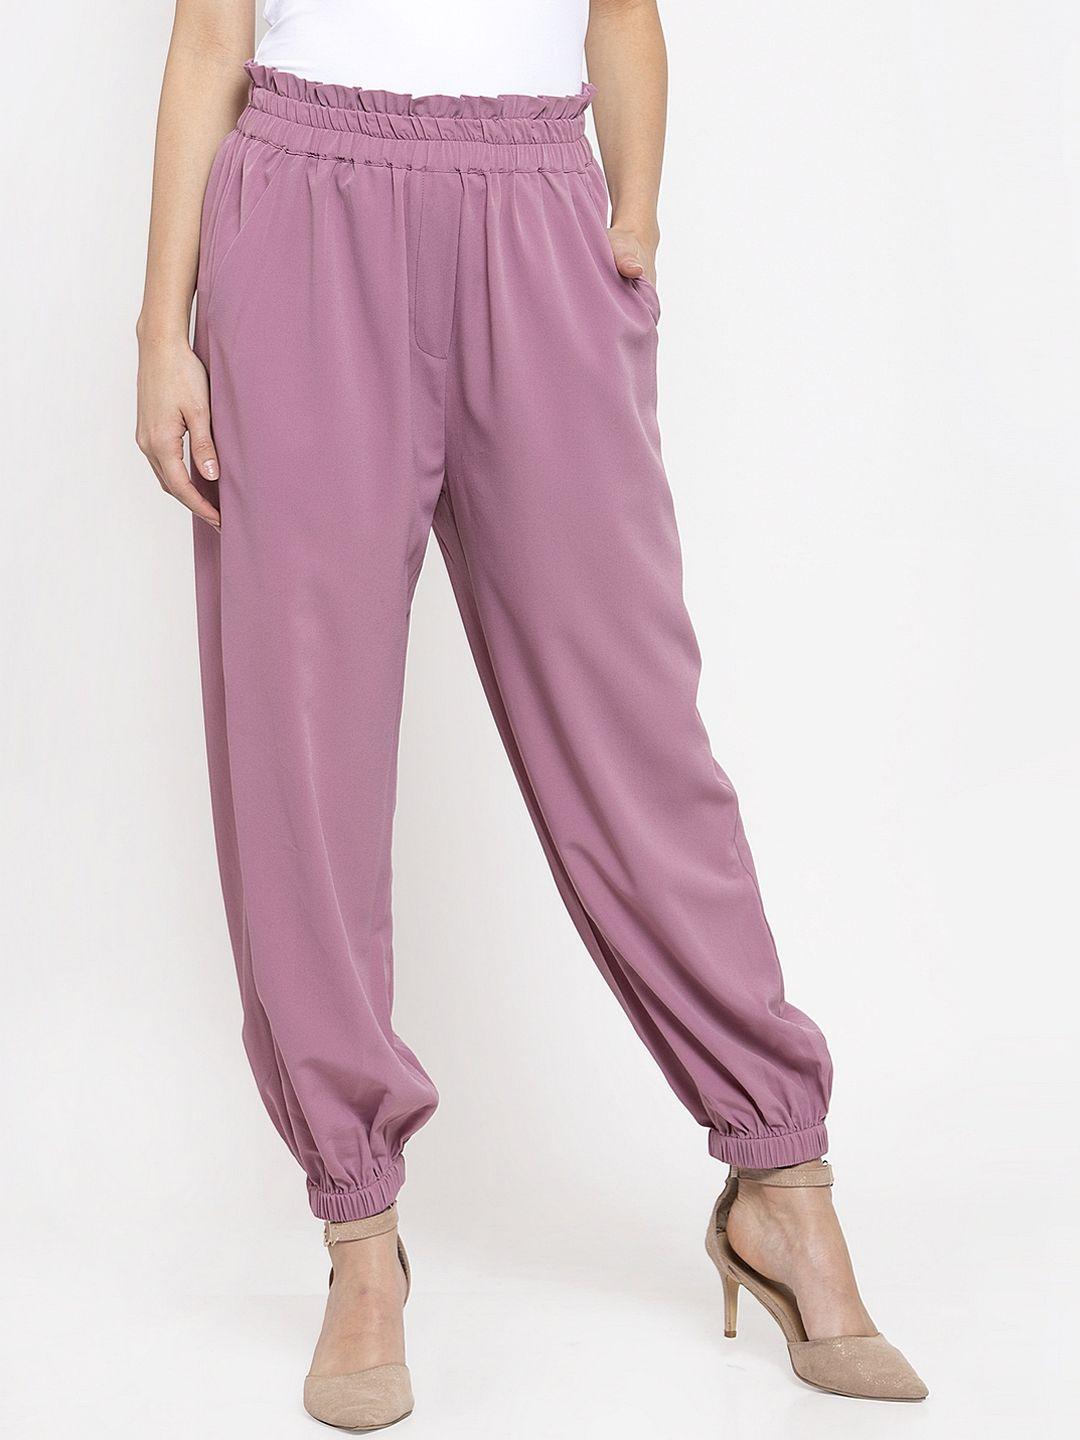 kassually women lavender regular fit solid joggers